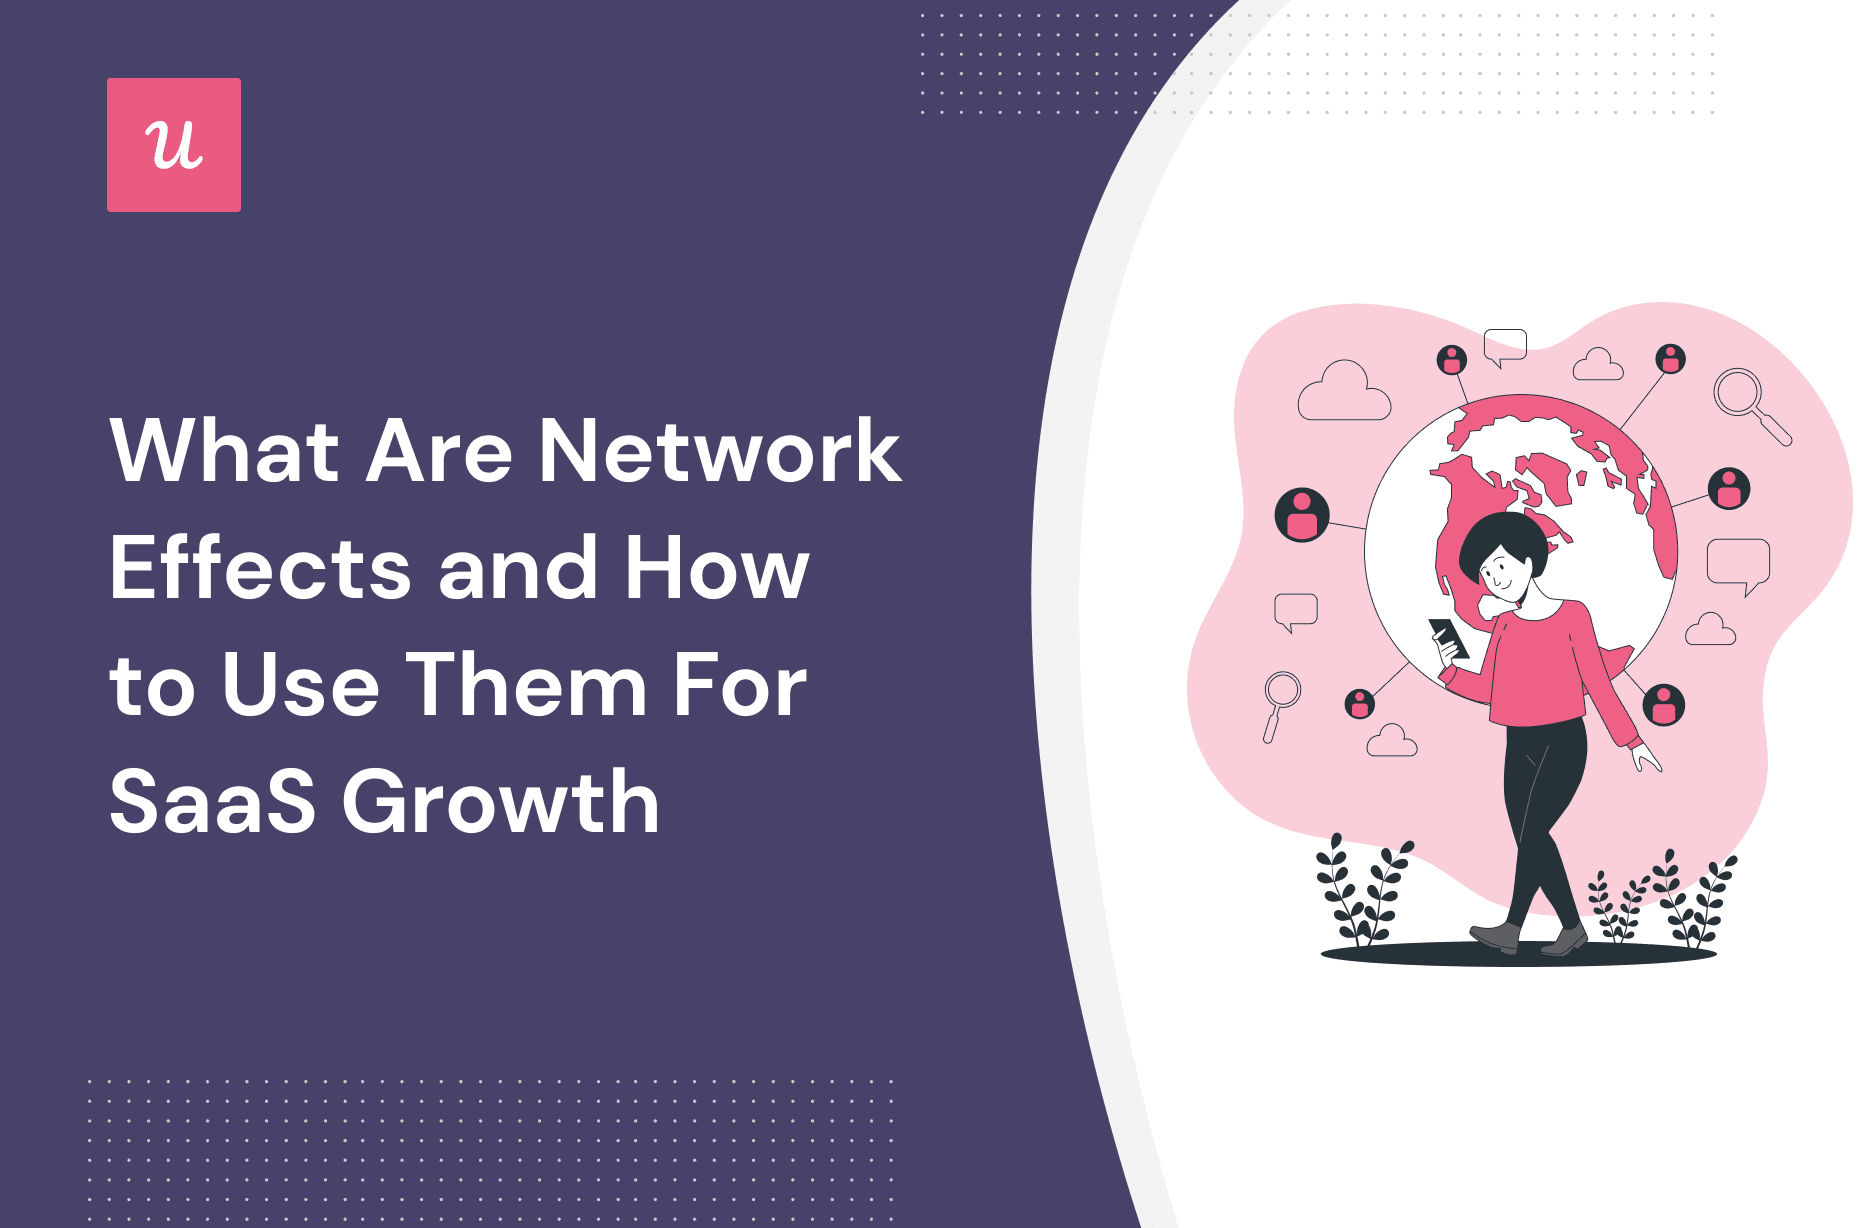 What Are Network Effects and How to Use Them For SaaS Growth cover